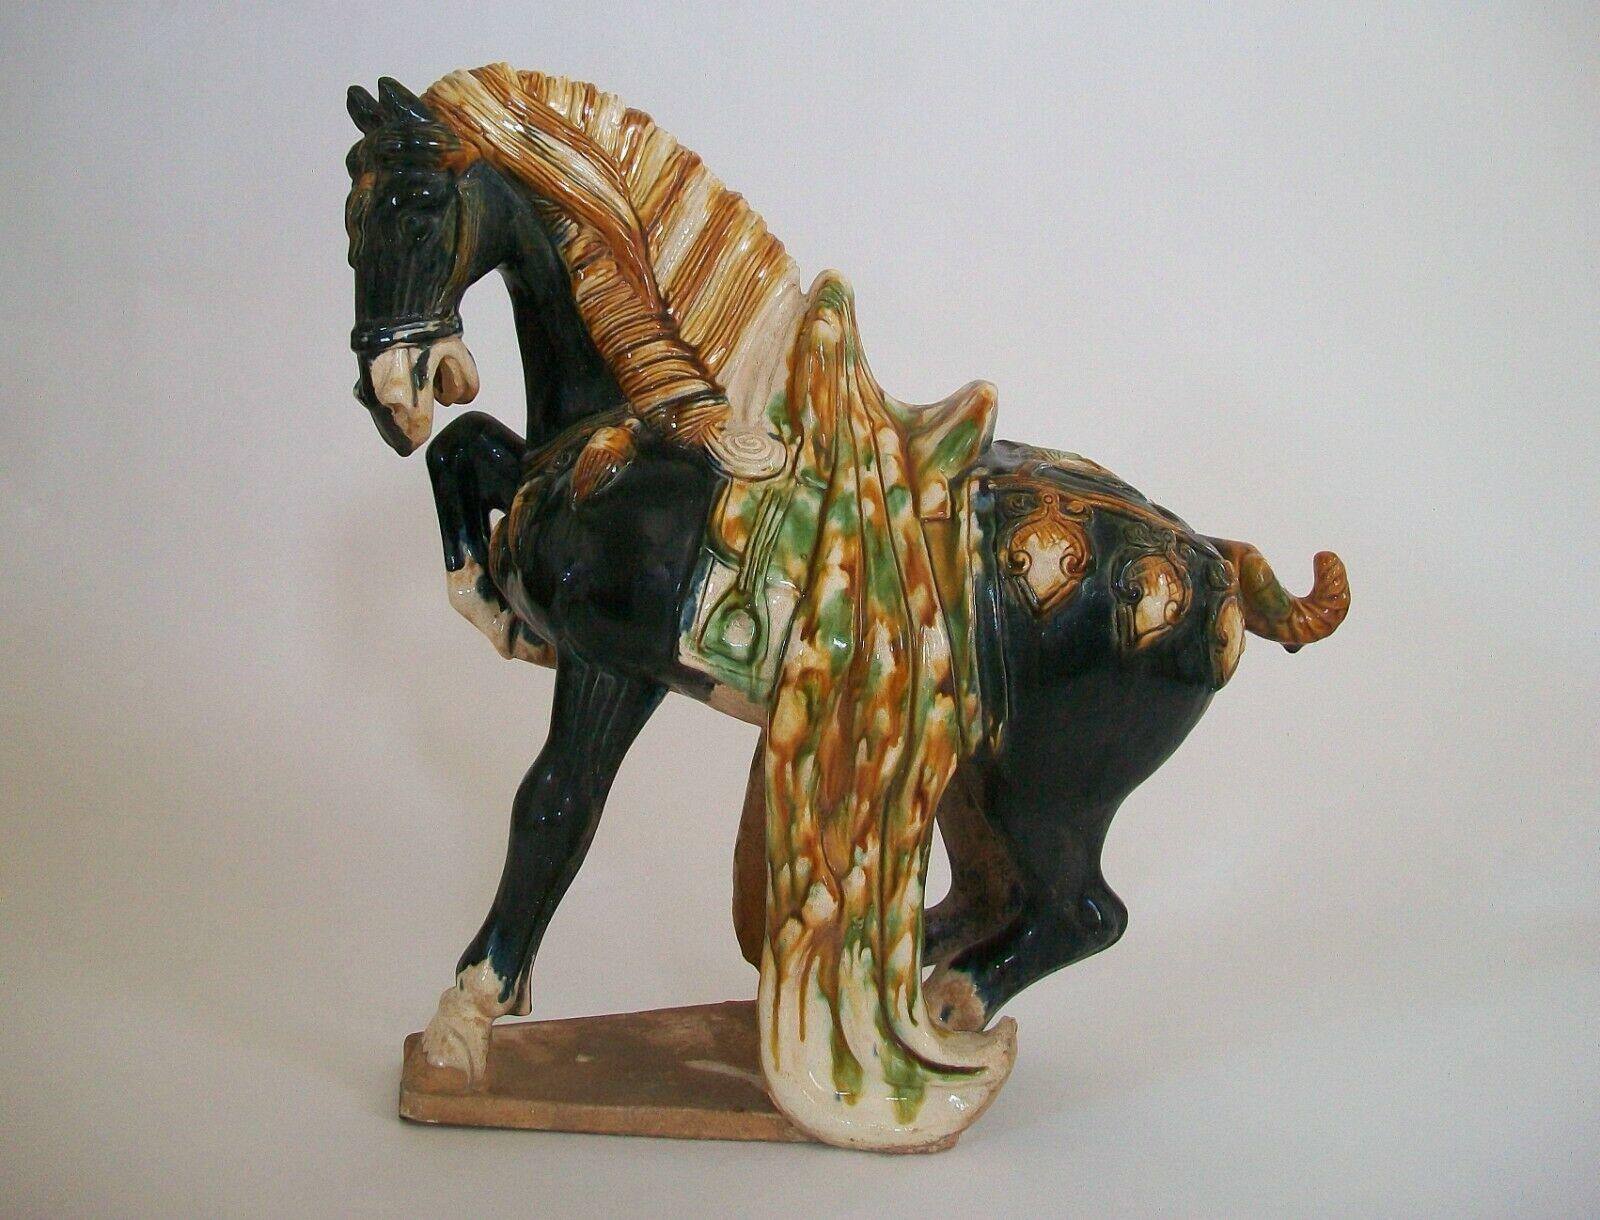 Hand-Crafted Large Vintage Sancai Glazed Tang Style Ceramic Horse, China, Late 20th Century